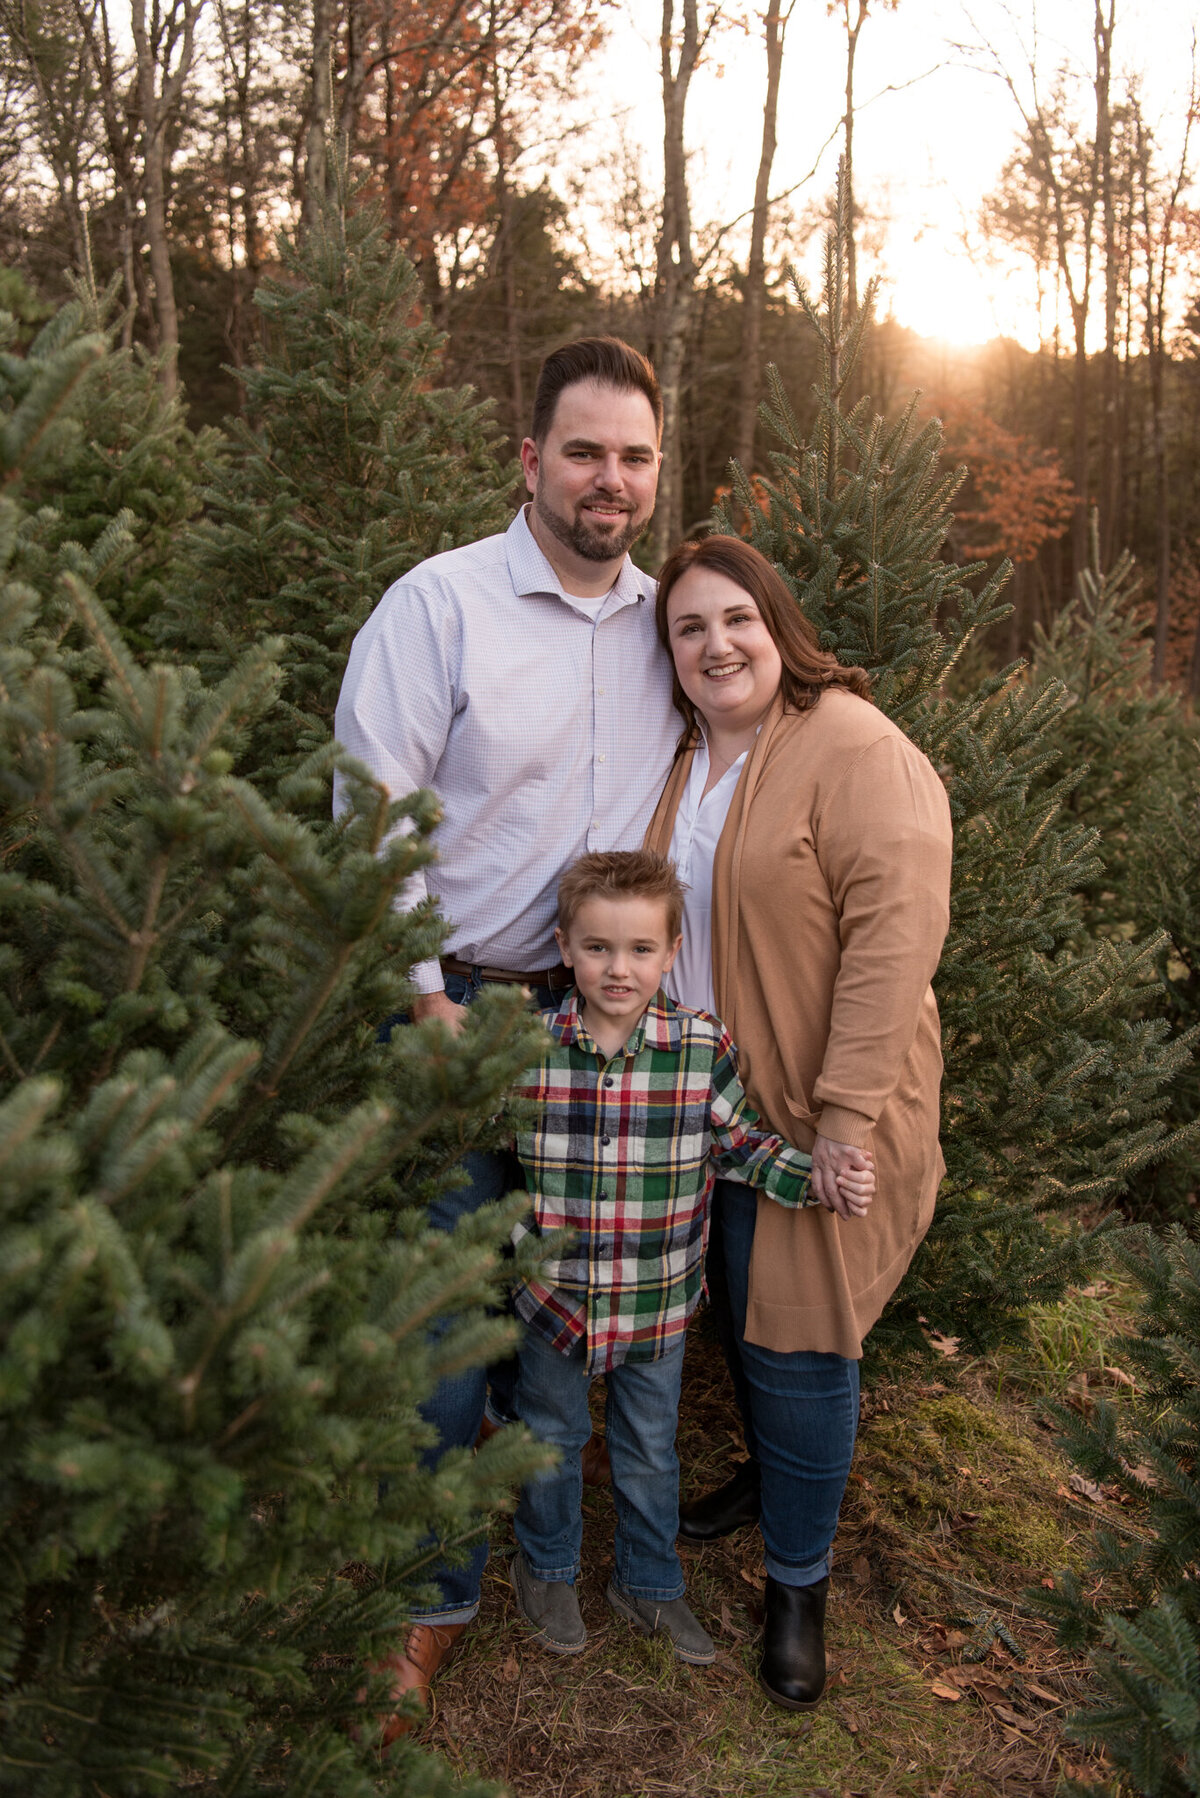 Mom, Dad, little boy smiling and looking at the camera with Christmas trees in the background